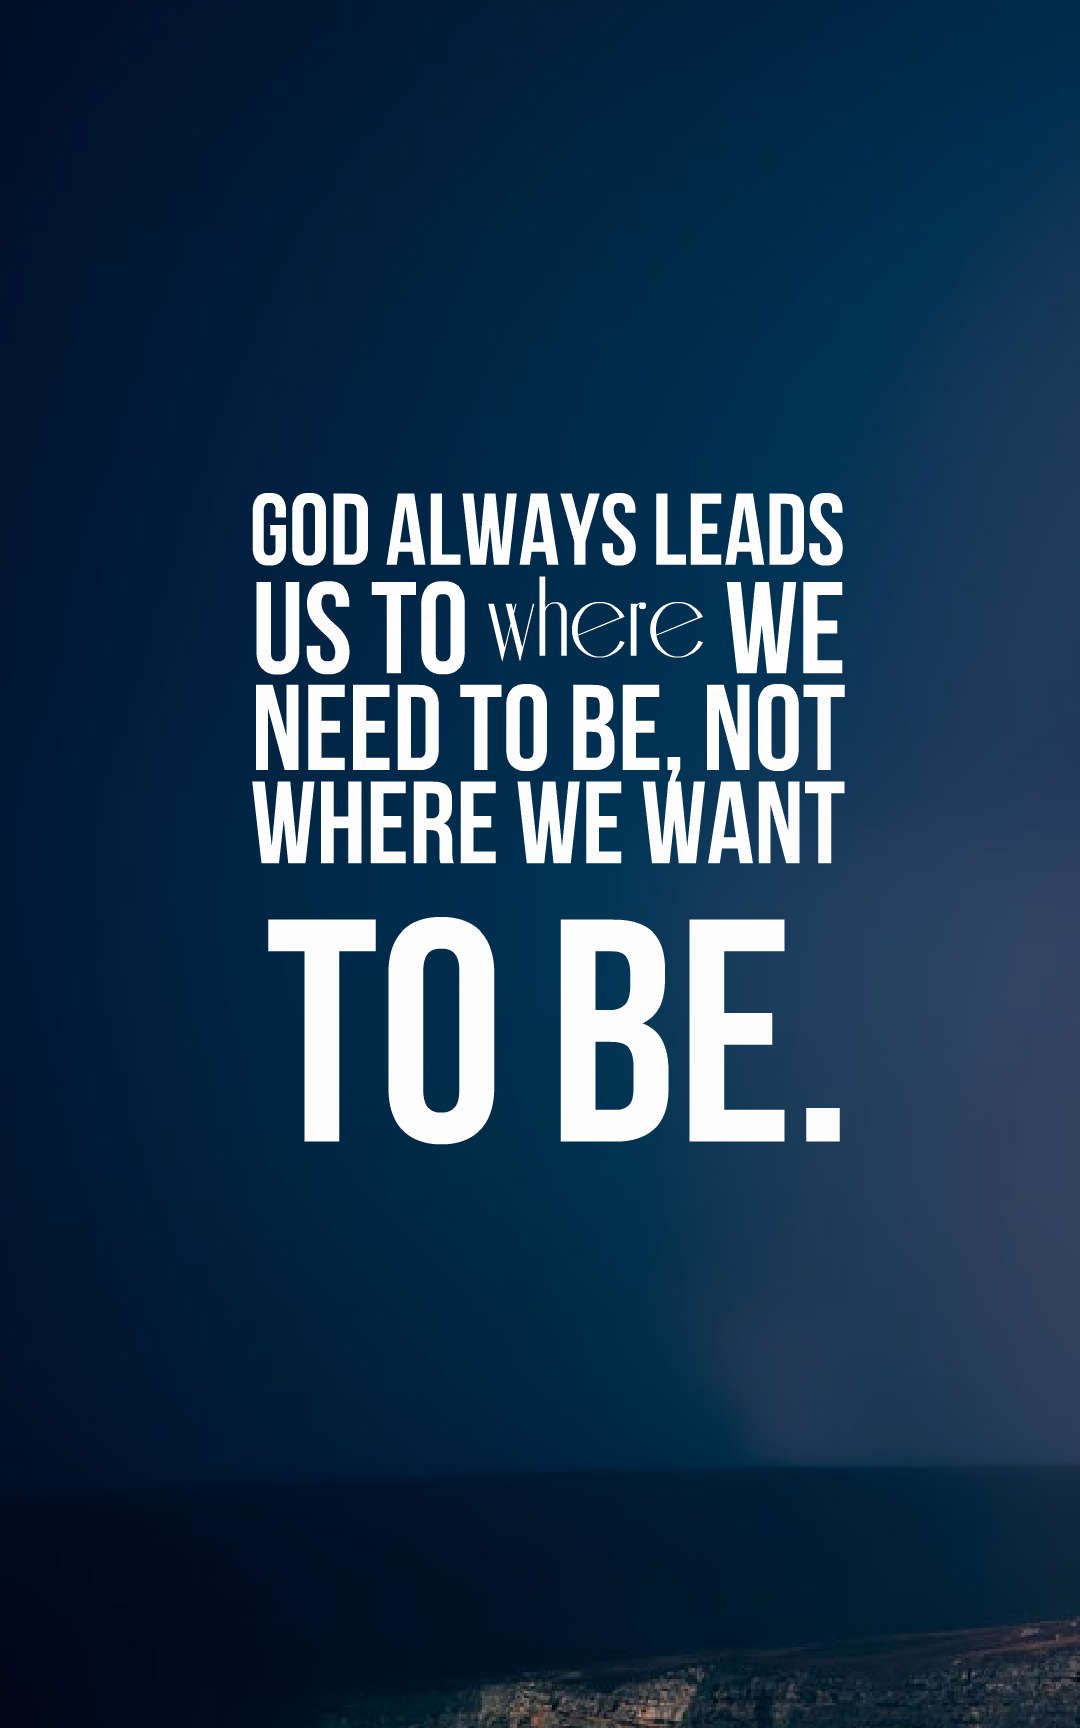 God always leads us to where we need to be, not where we want to be.